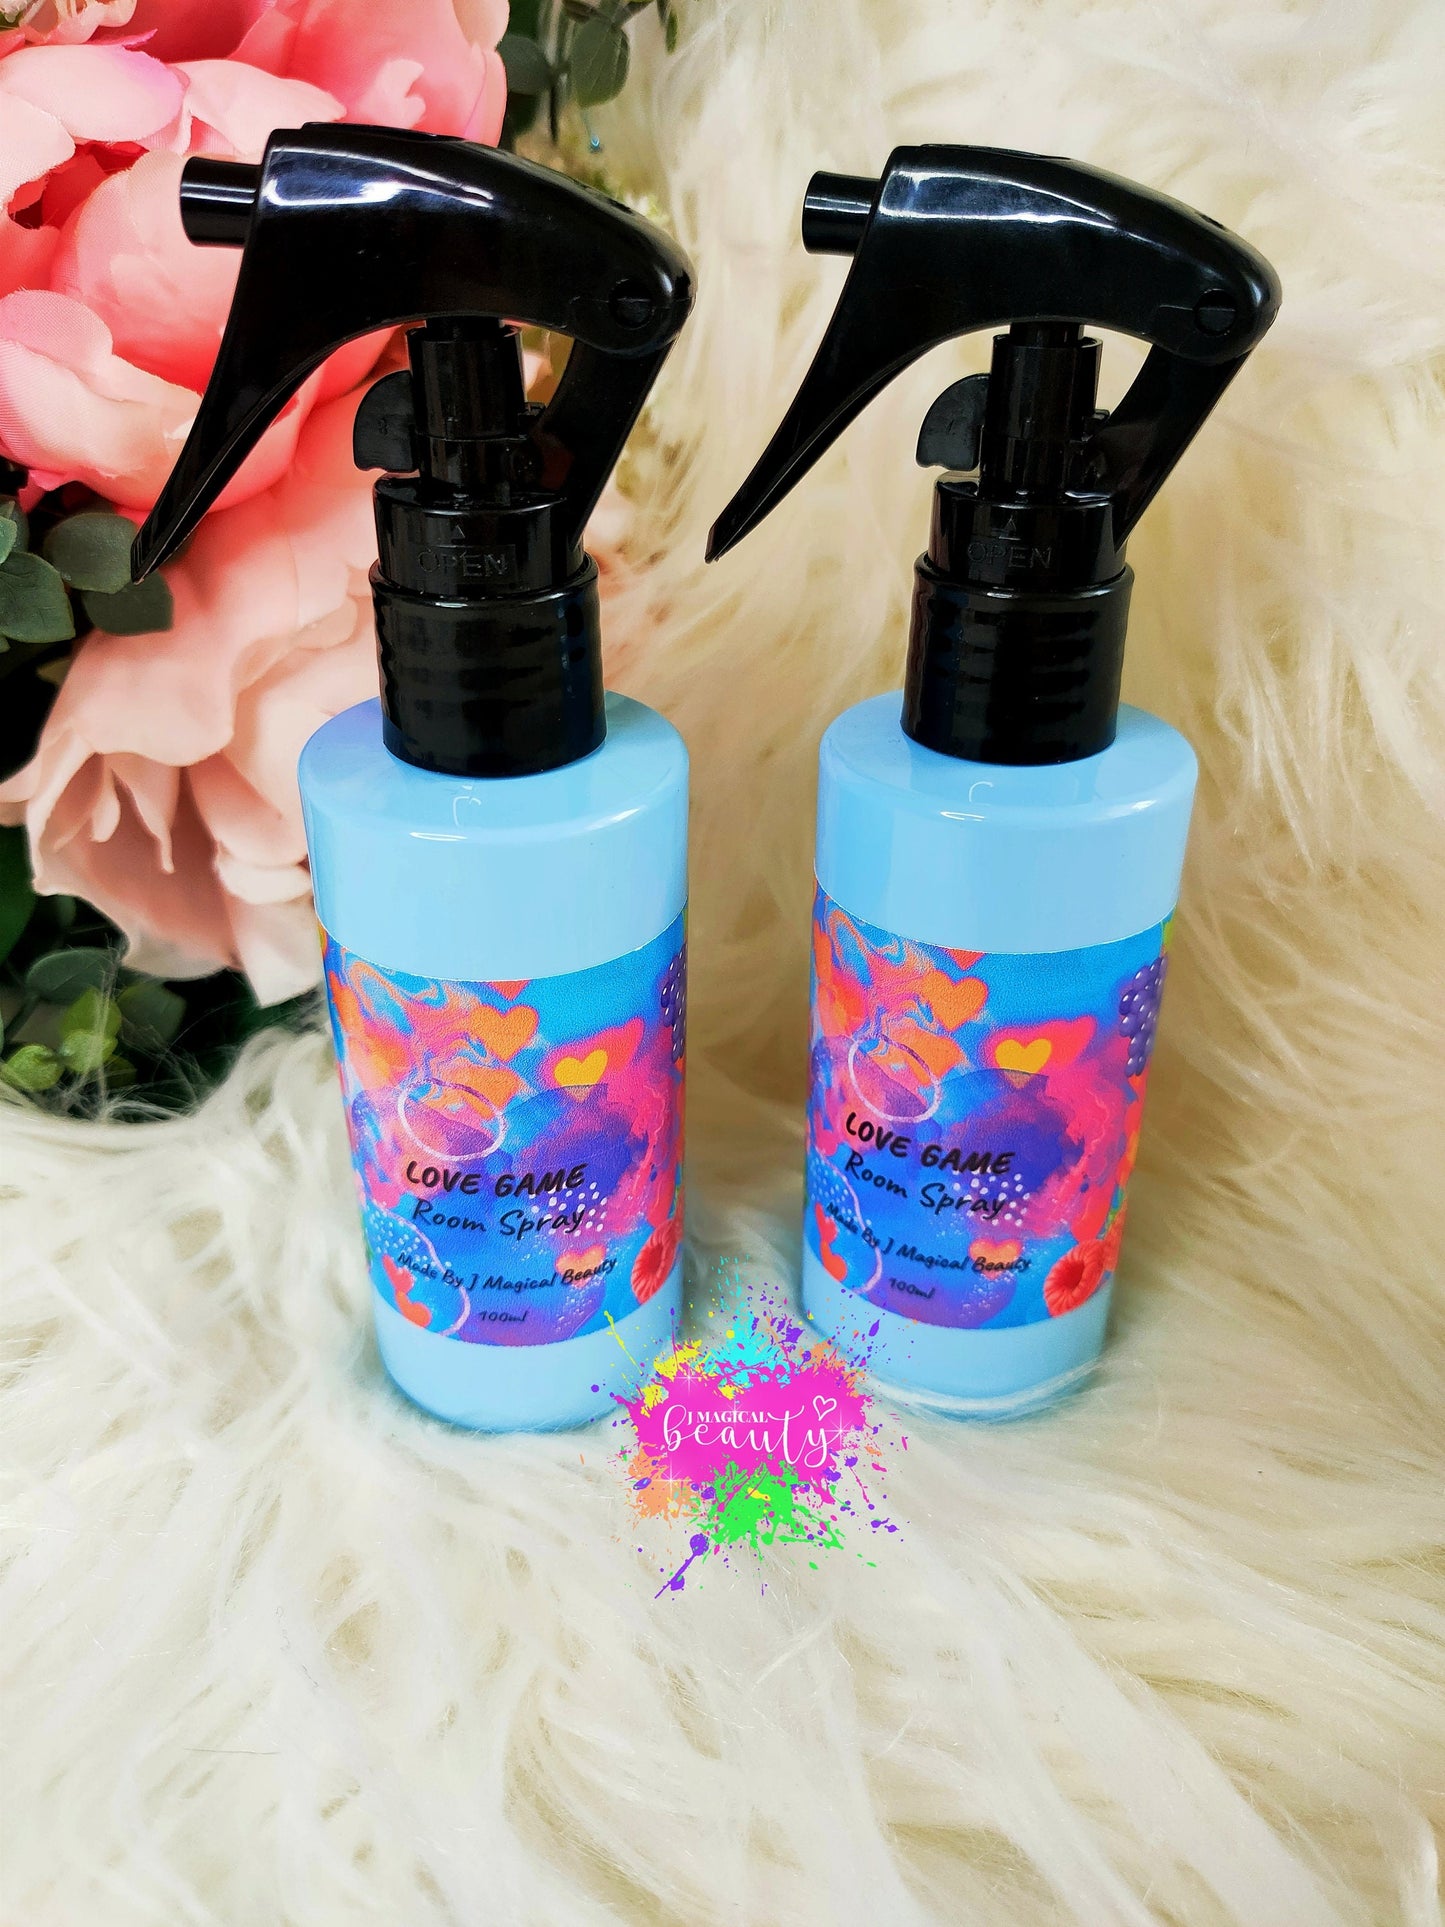 Room Spray Love Game scent